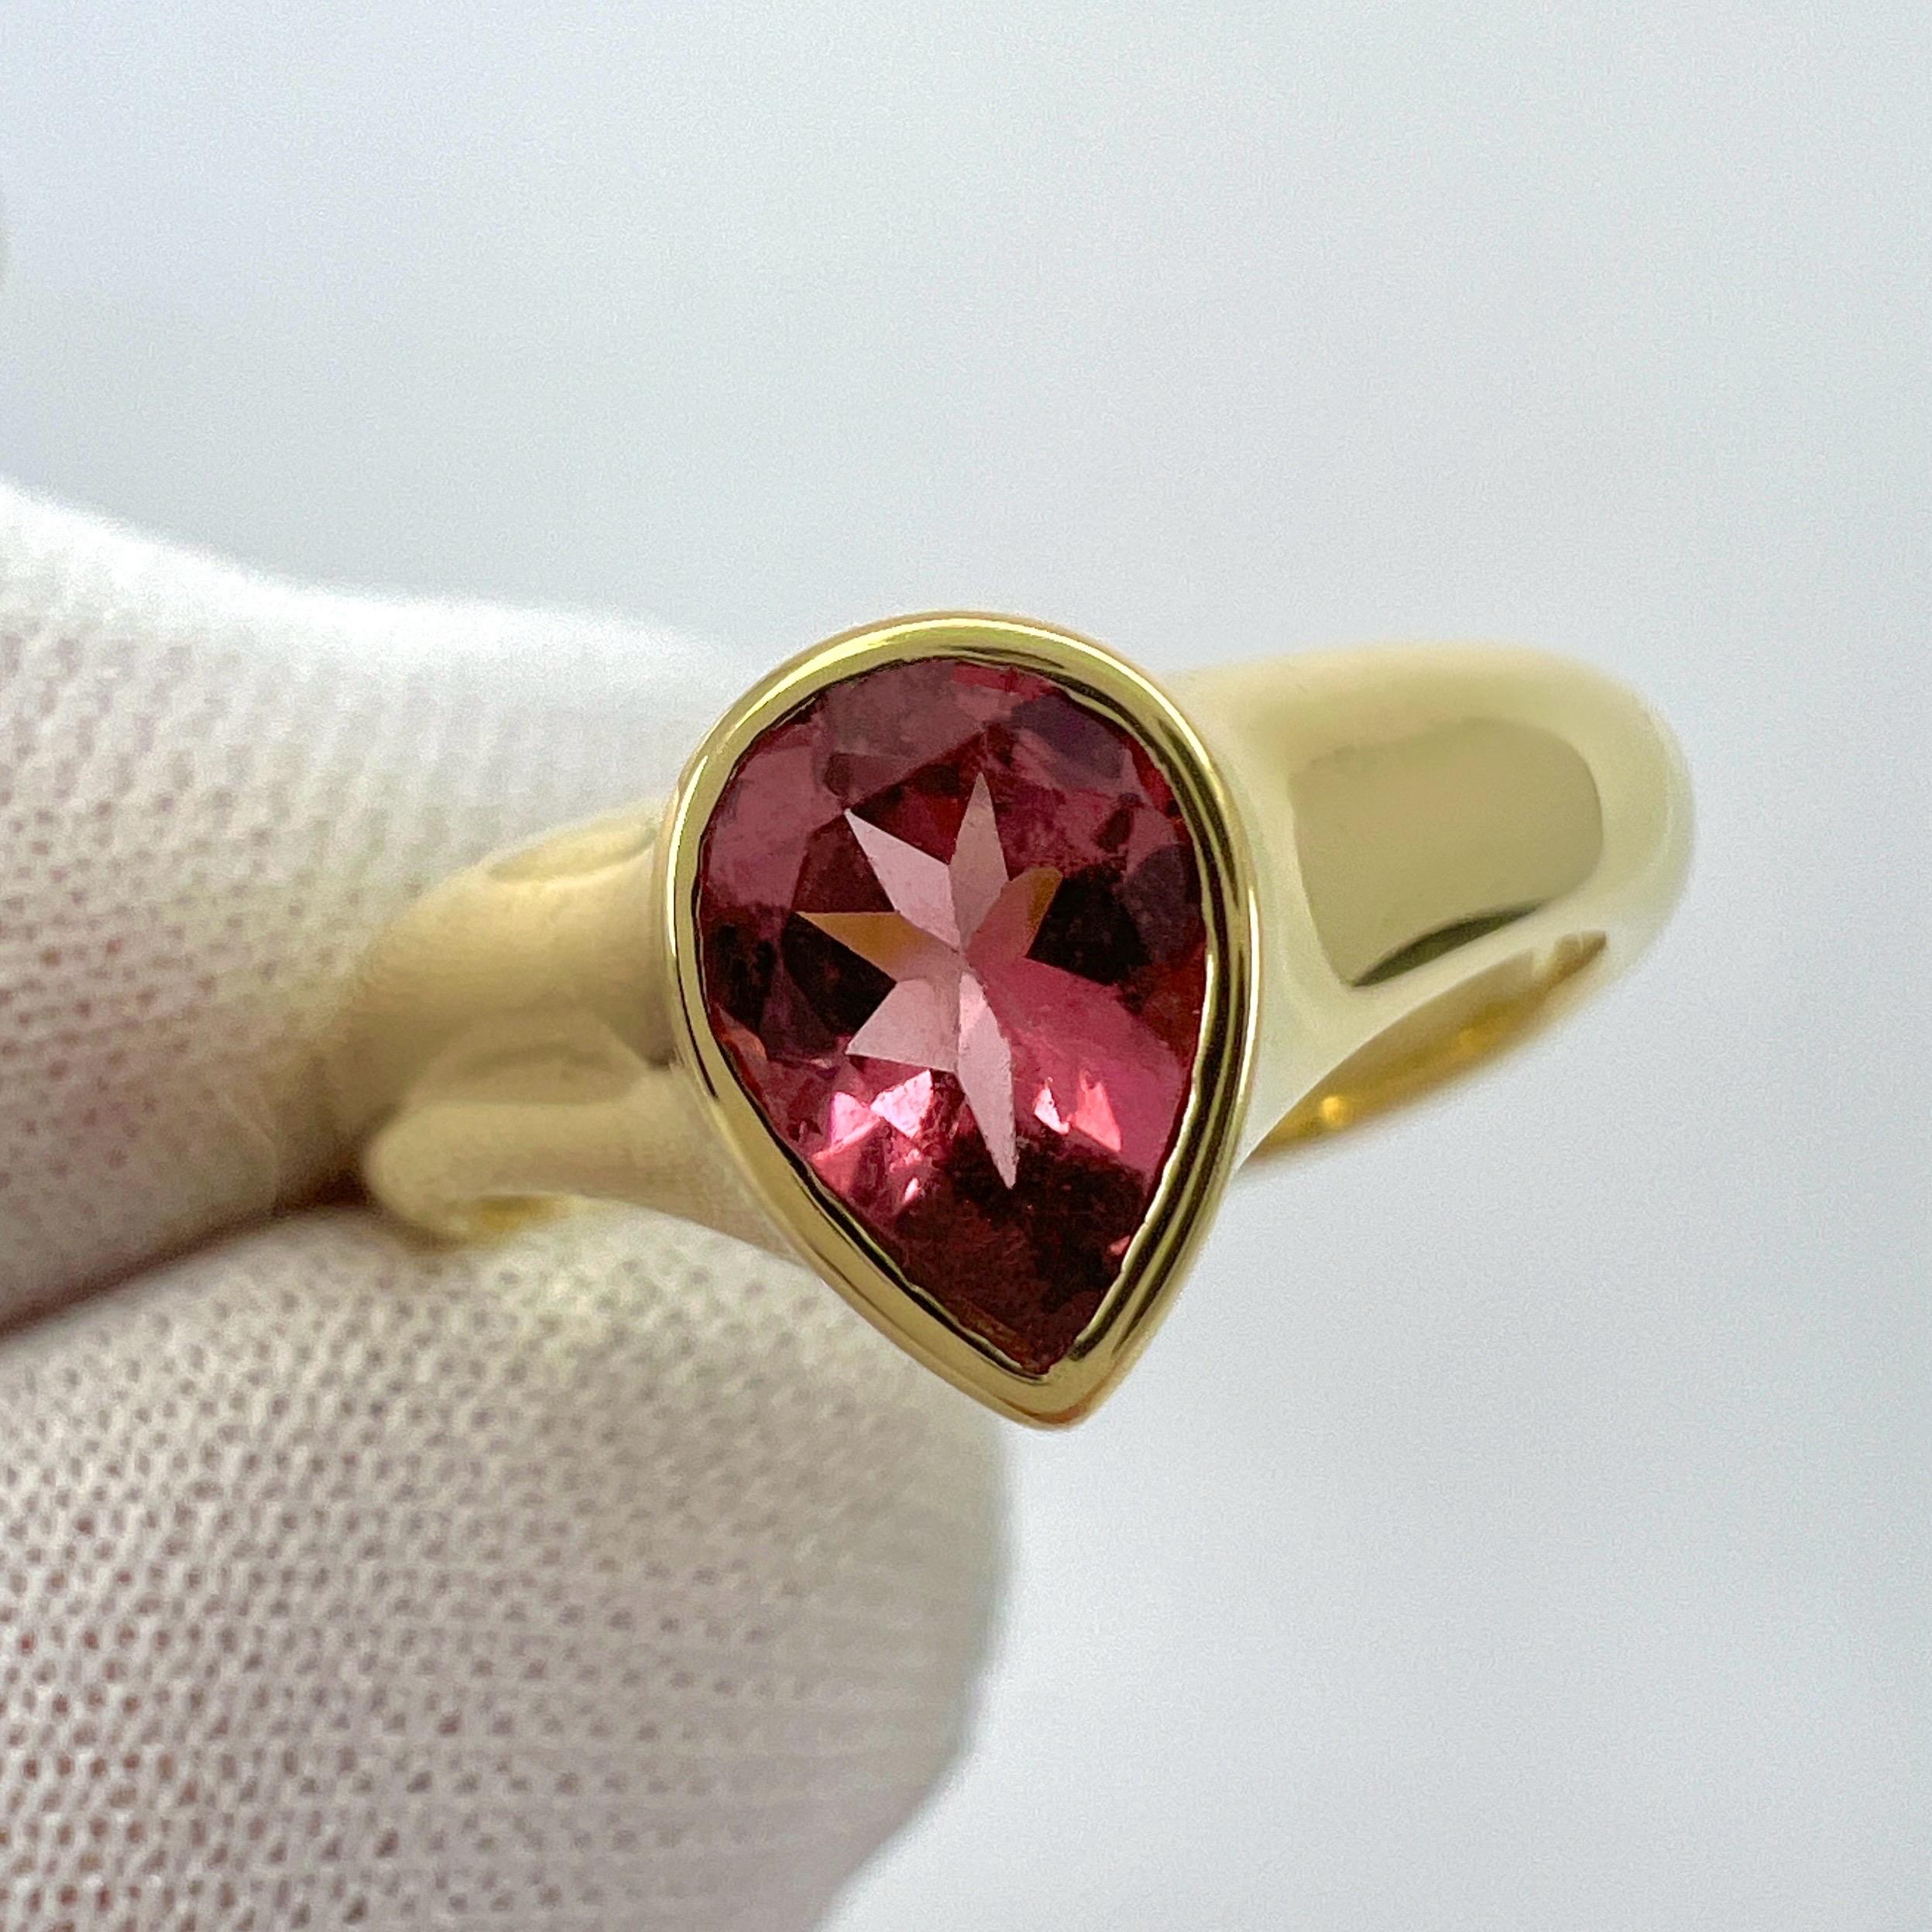 Rare Vintage Van Cleef & Arpels Pink Tourmaline Pear Cut 18k Yellow Gold Ring For Sale 3